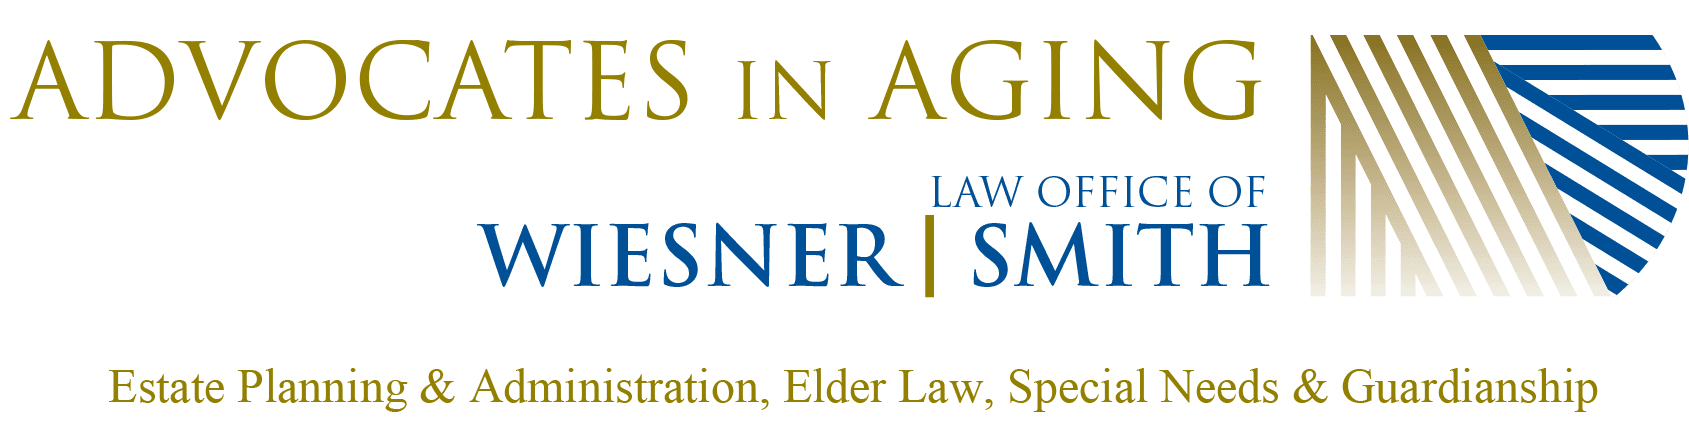 Advocates in Aging: Law Office of Wiesner Smith